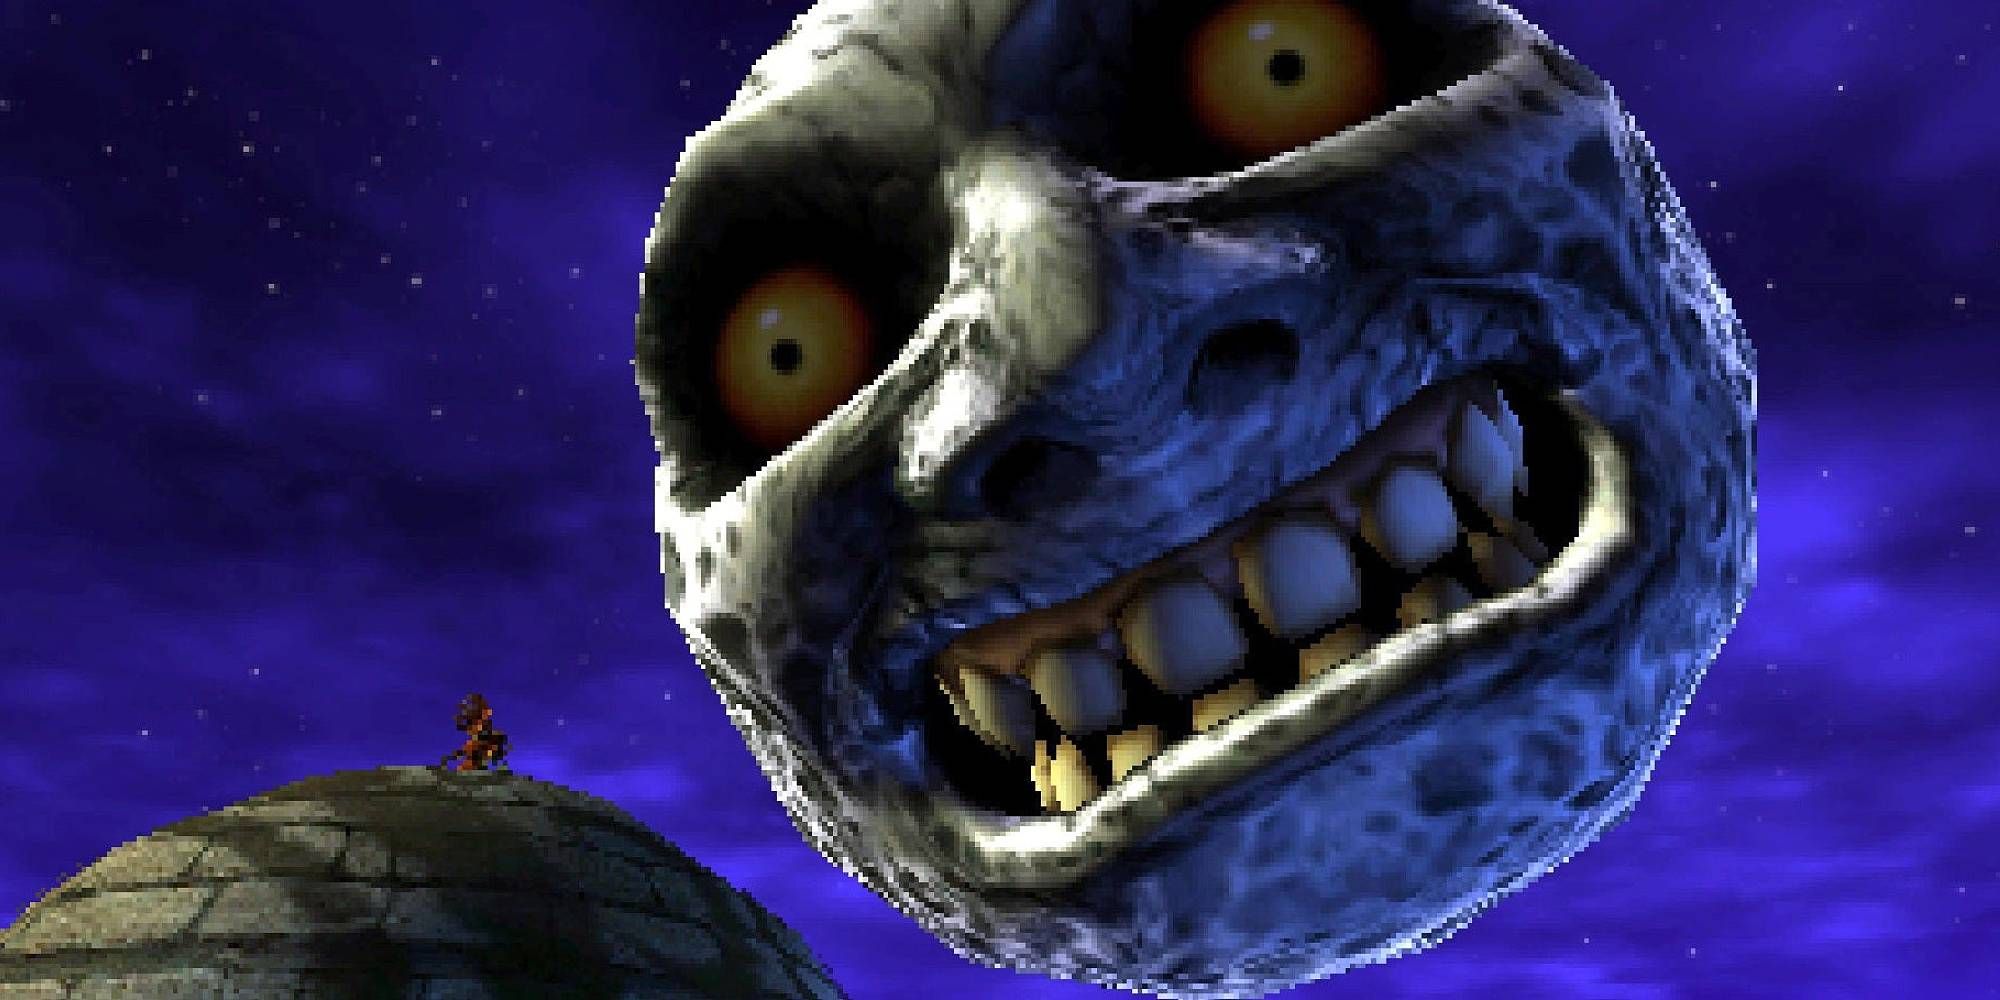 The moon from Majora's Mask descends close to a small figure on a rooftop